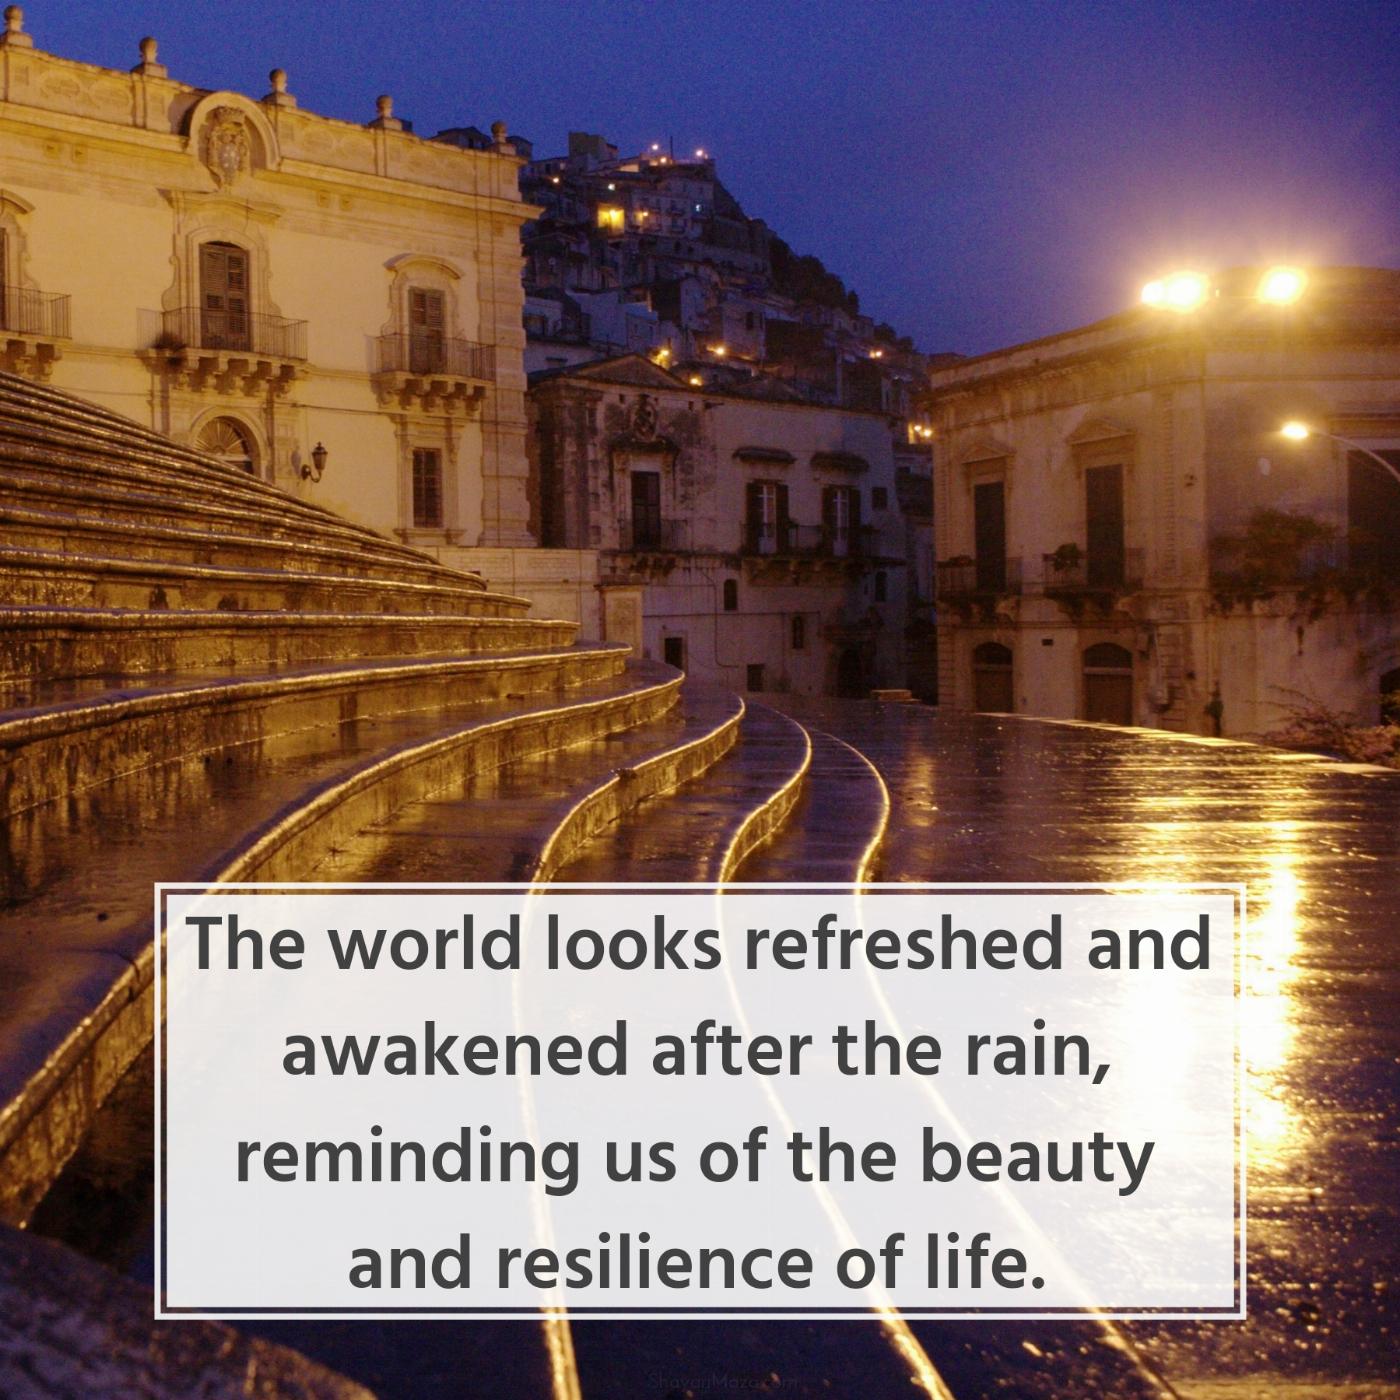 The world looks refreshed and awakened after the rain